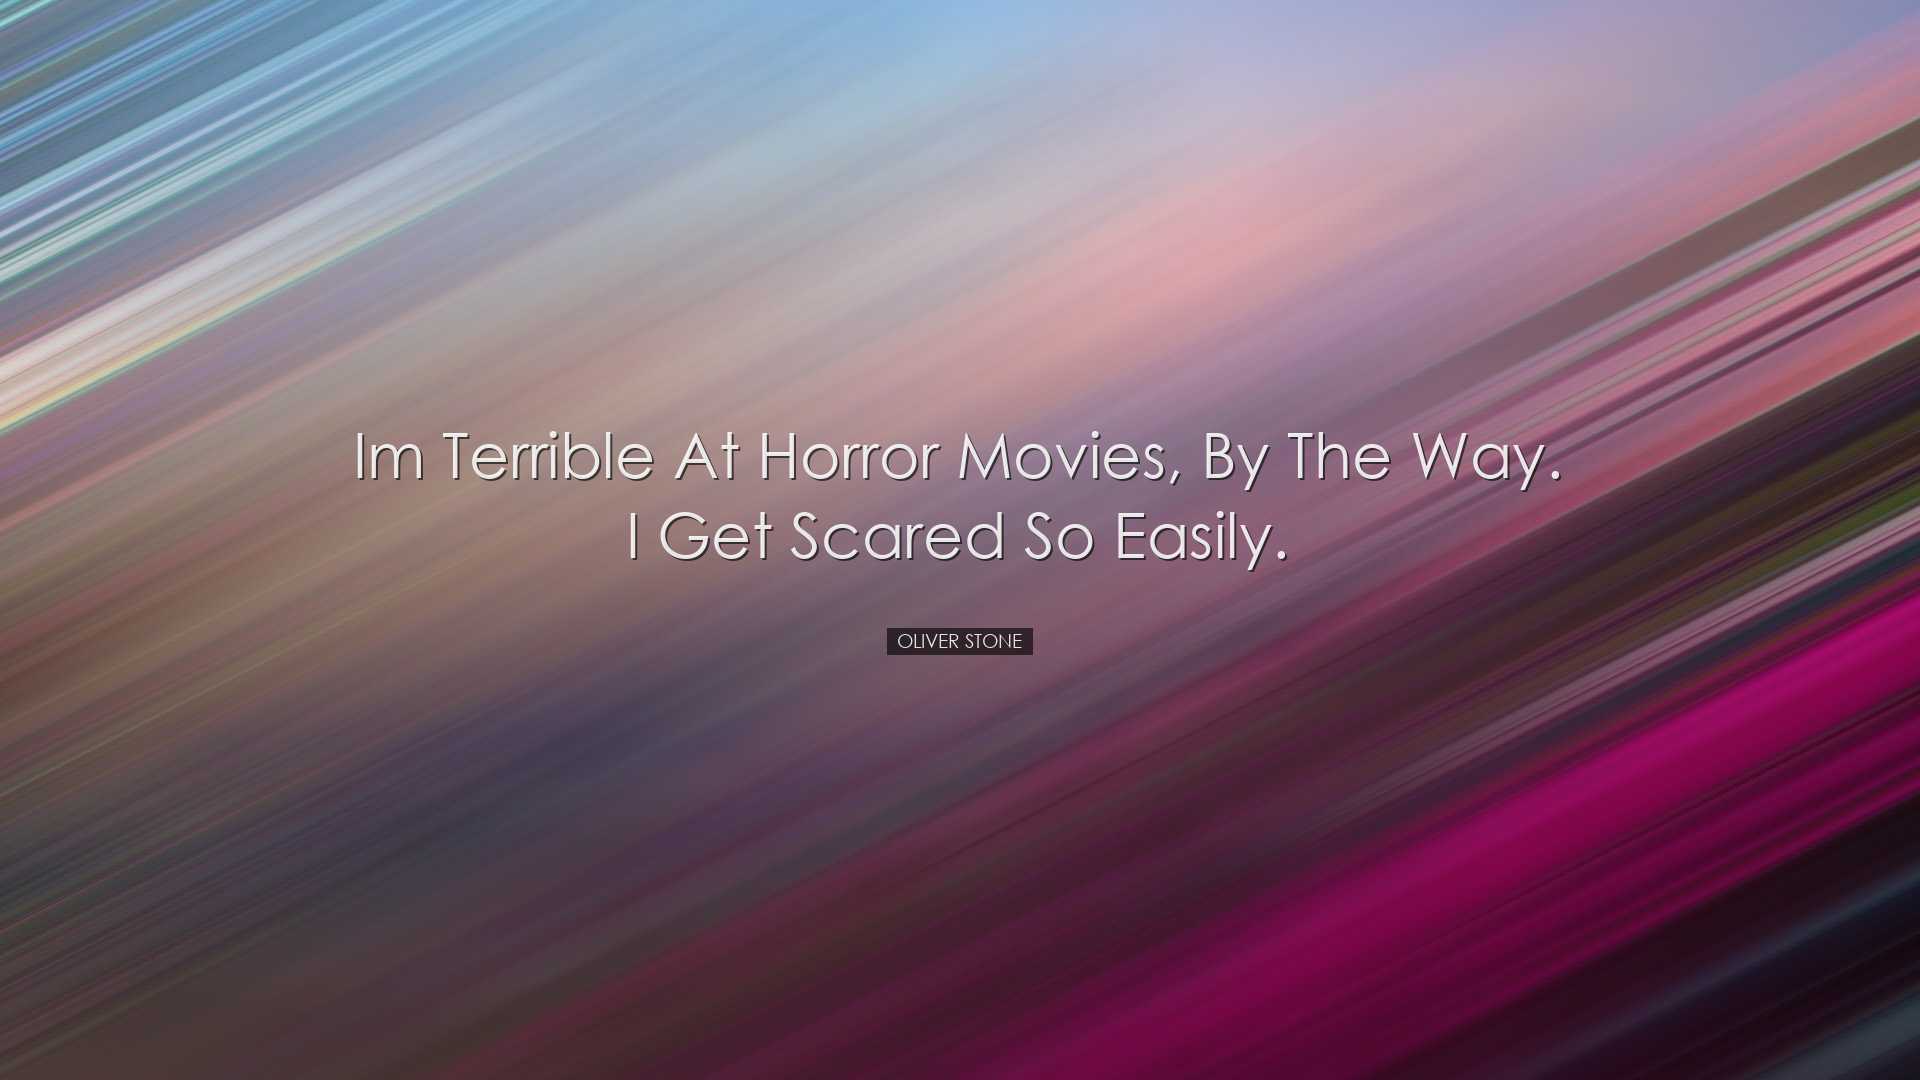 Im terrible at horror movies, by the way. I get scared so easily.